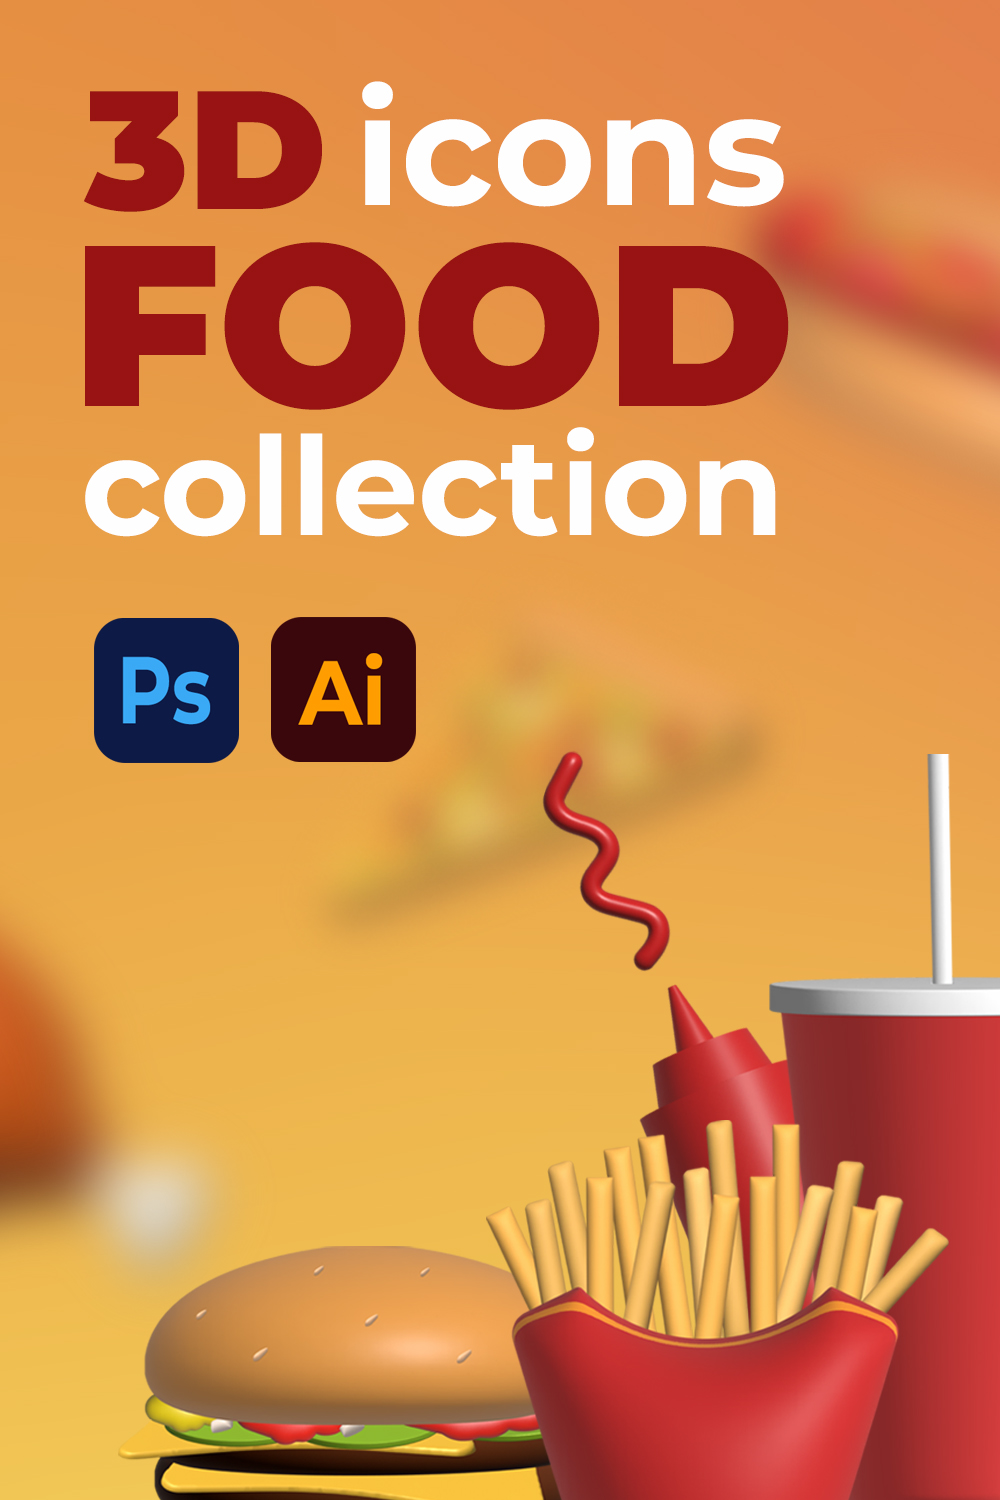 3D Food Icons Collection Pinterest Collage image.